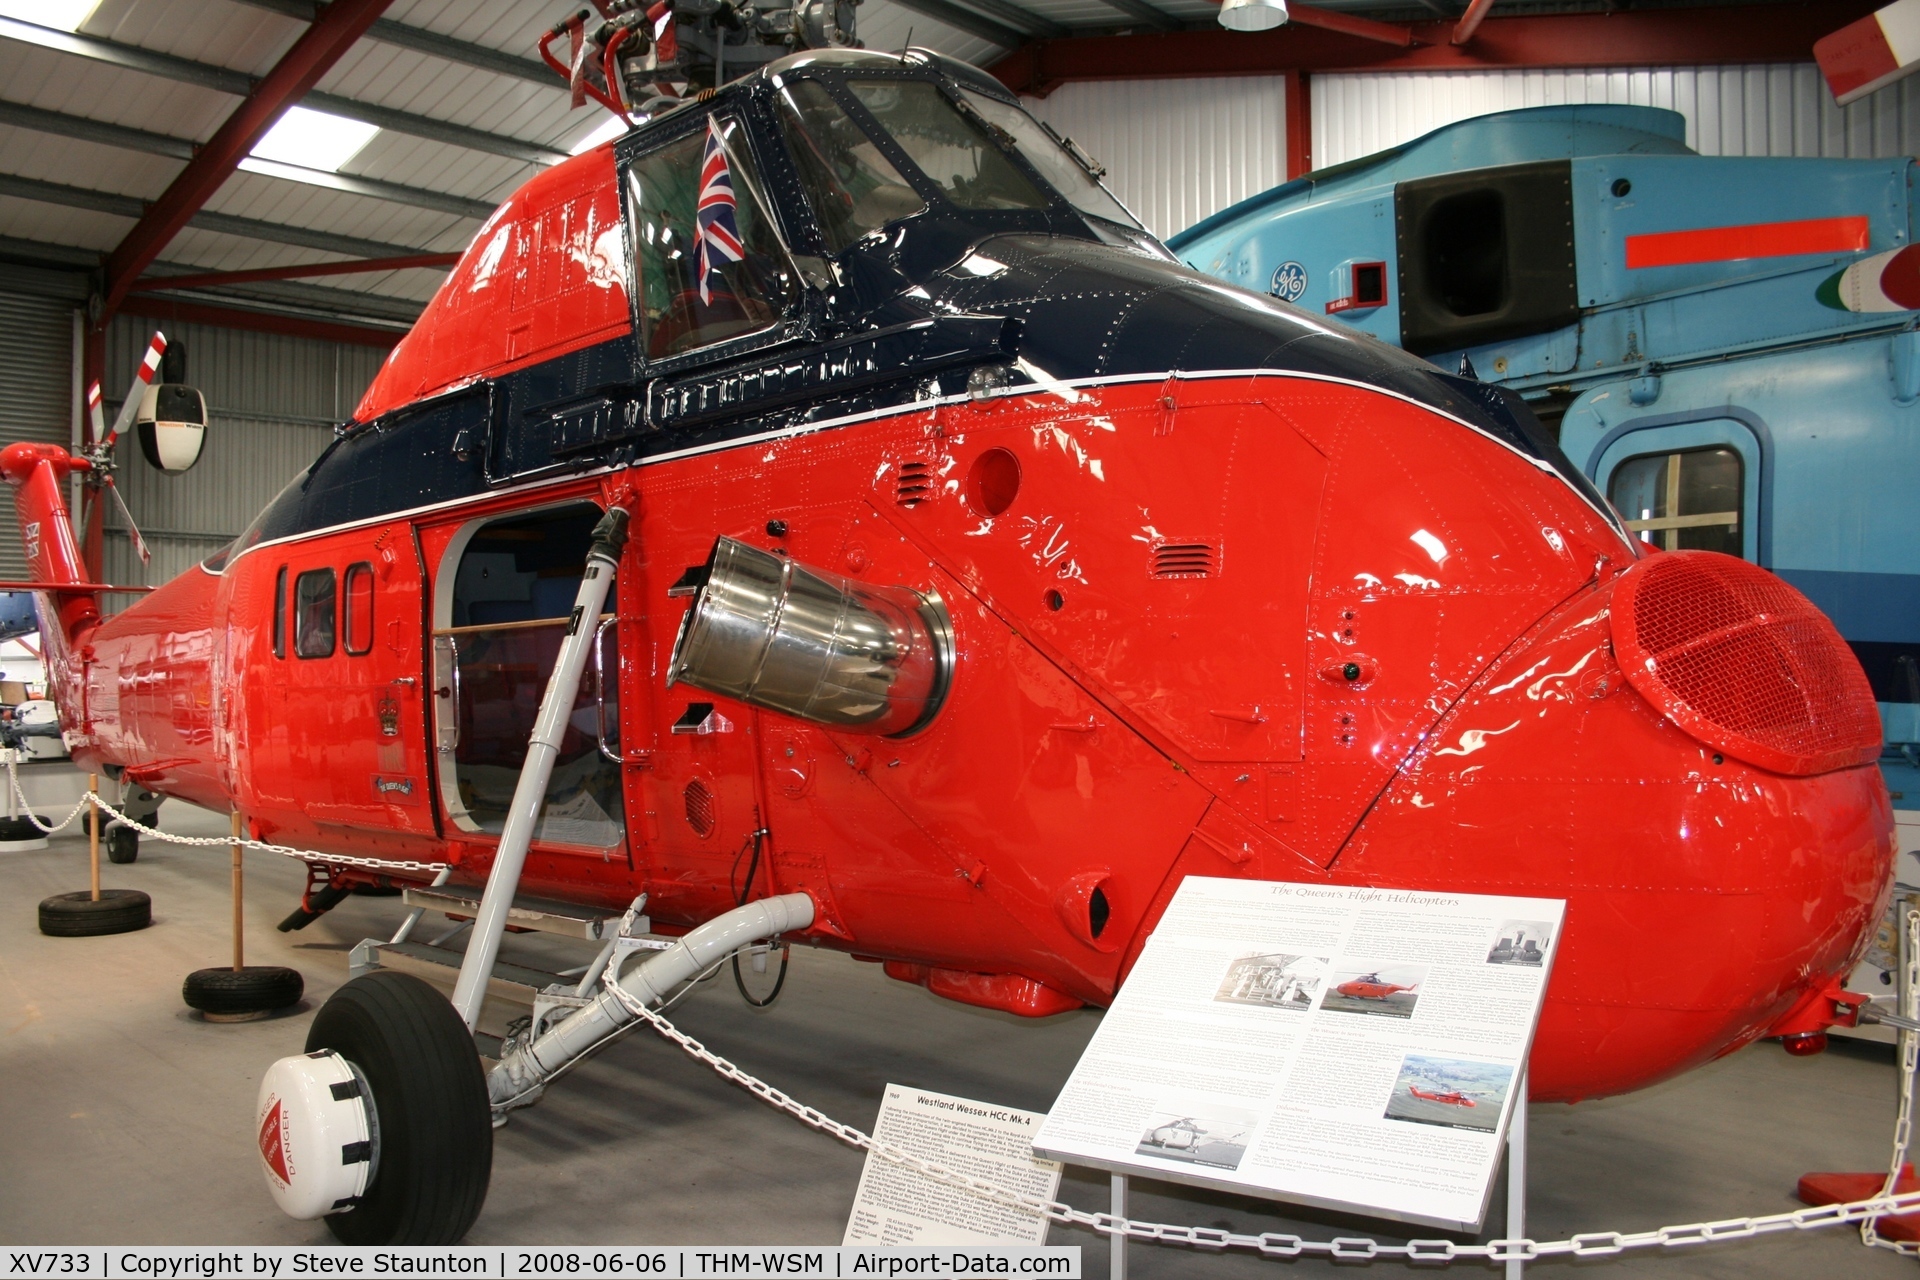 XV733, 1969 Westland Wessex HCC.4 C/N WA628, Taken at the Helicopter Museum (http://www.helicoptermuseum.co.uk/)